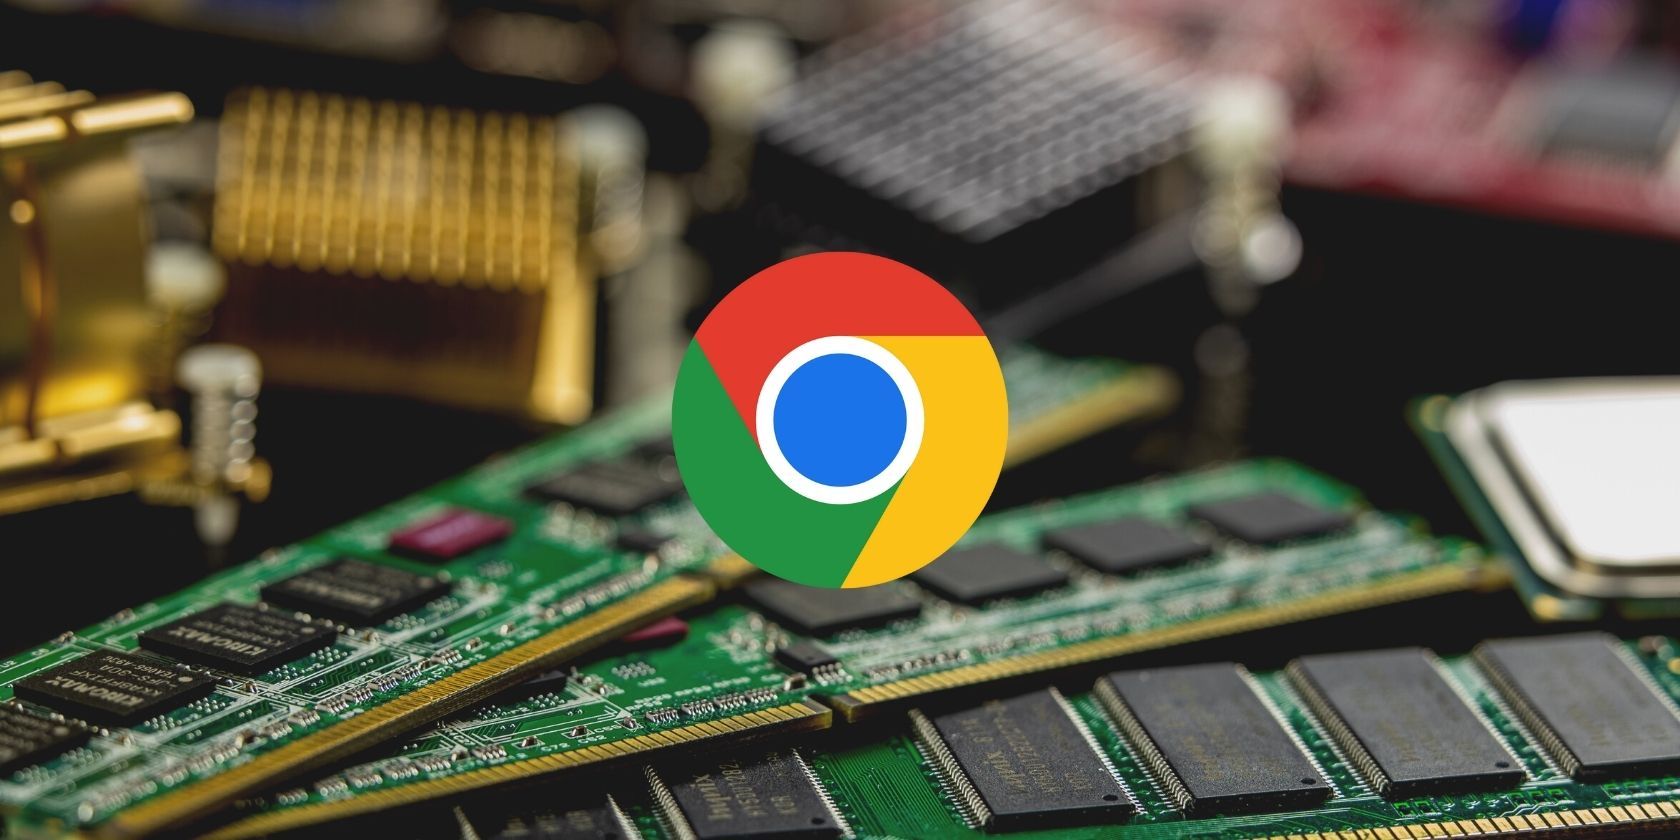 Image of RAM with Google Chrome logo in center